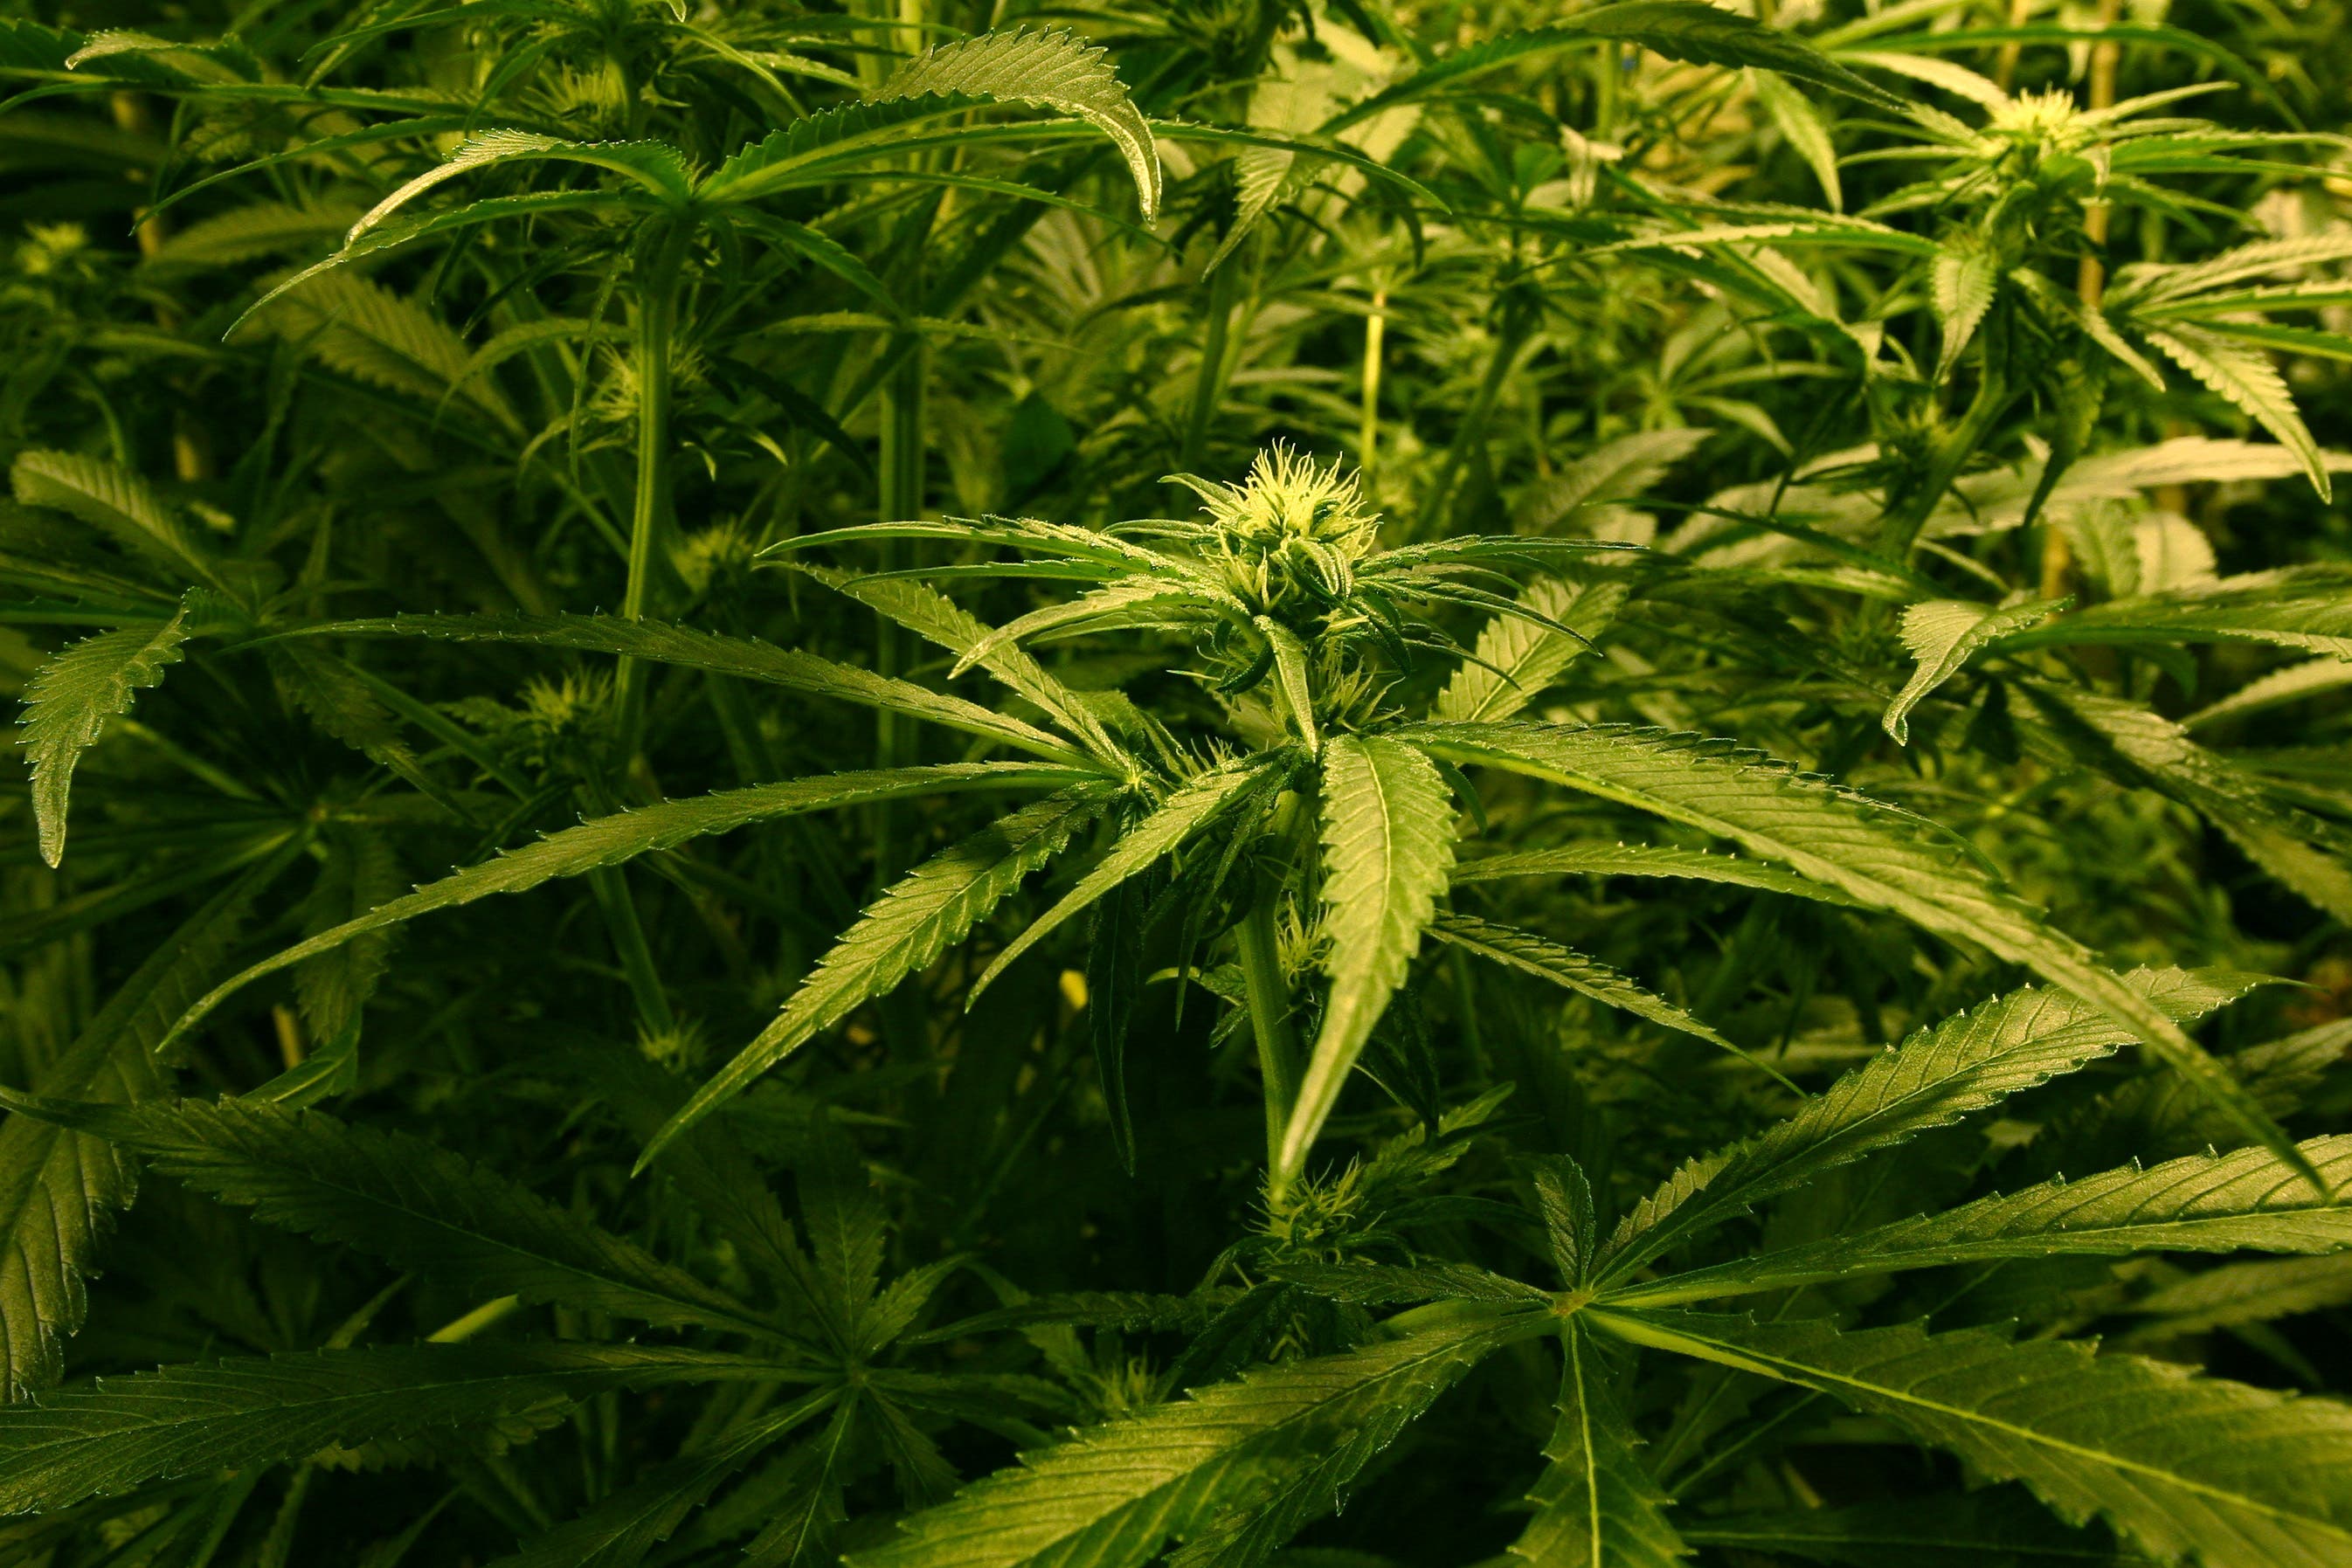 Some police and crime commissioners have called for cannabis to be reclassified